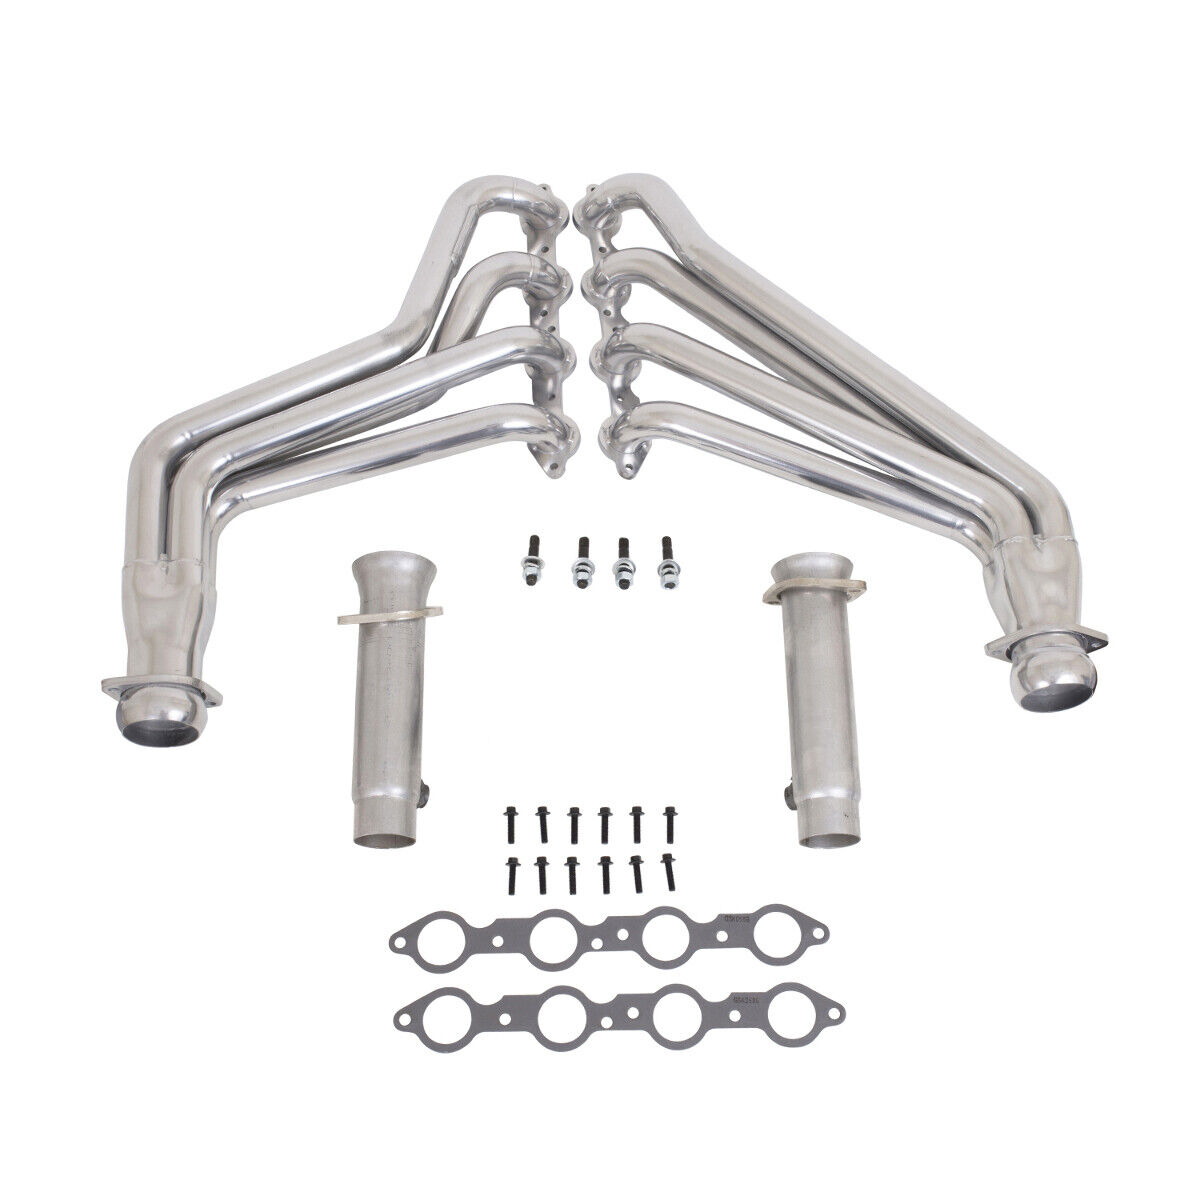 Fits 2010-2015 Camaro LS3/L99 1-7/8 Long Tube Header System W/Cats-Silver-40540